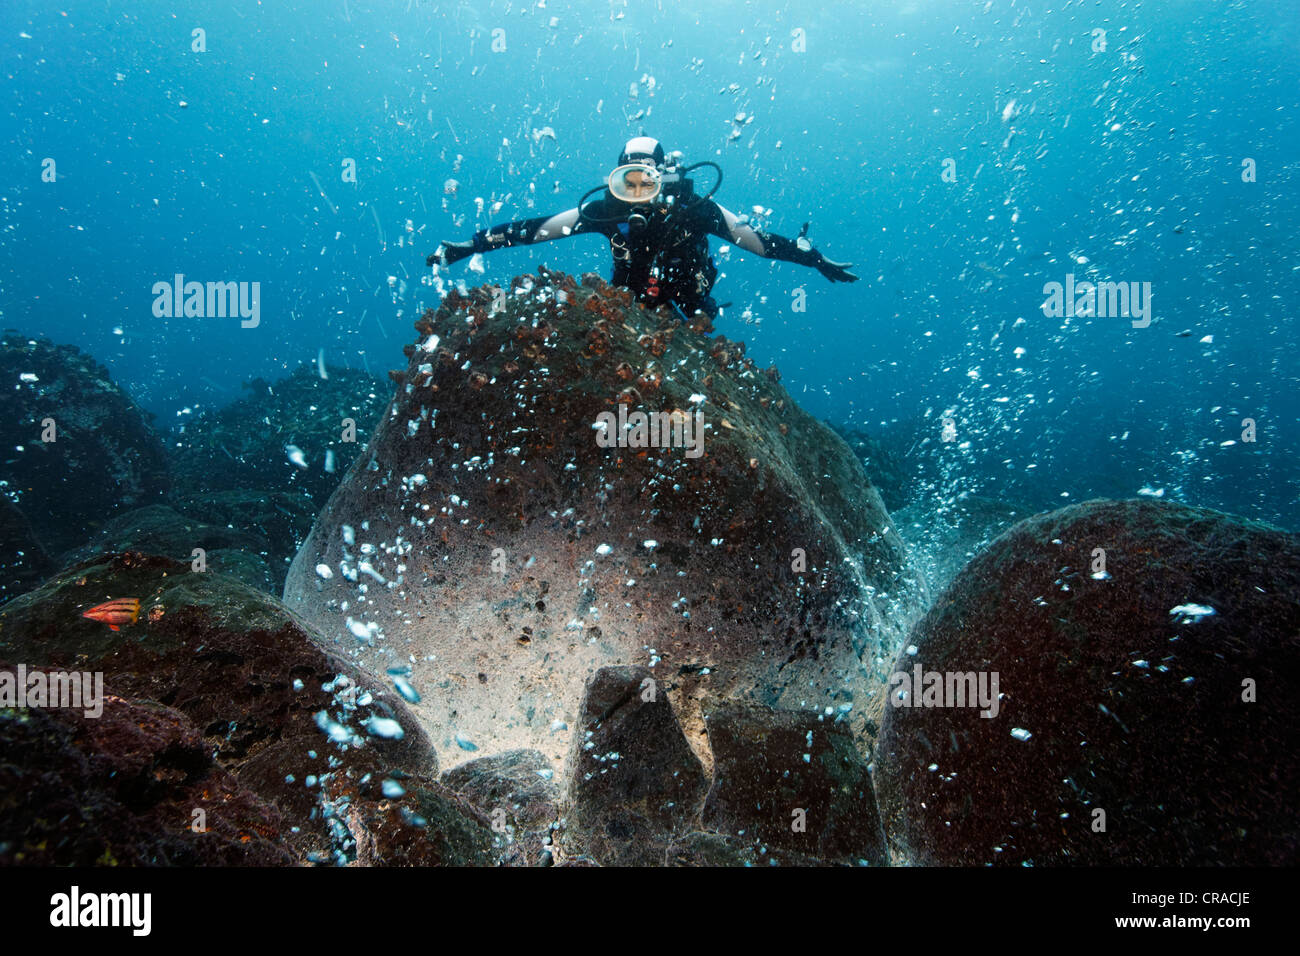 Diver measuring the spring with his armes, rocks over a volcanic hot spot, white mineral deposits, hot springs, gas bubbles, Stock Photo